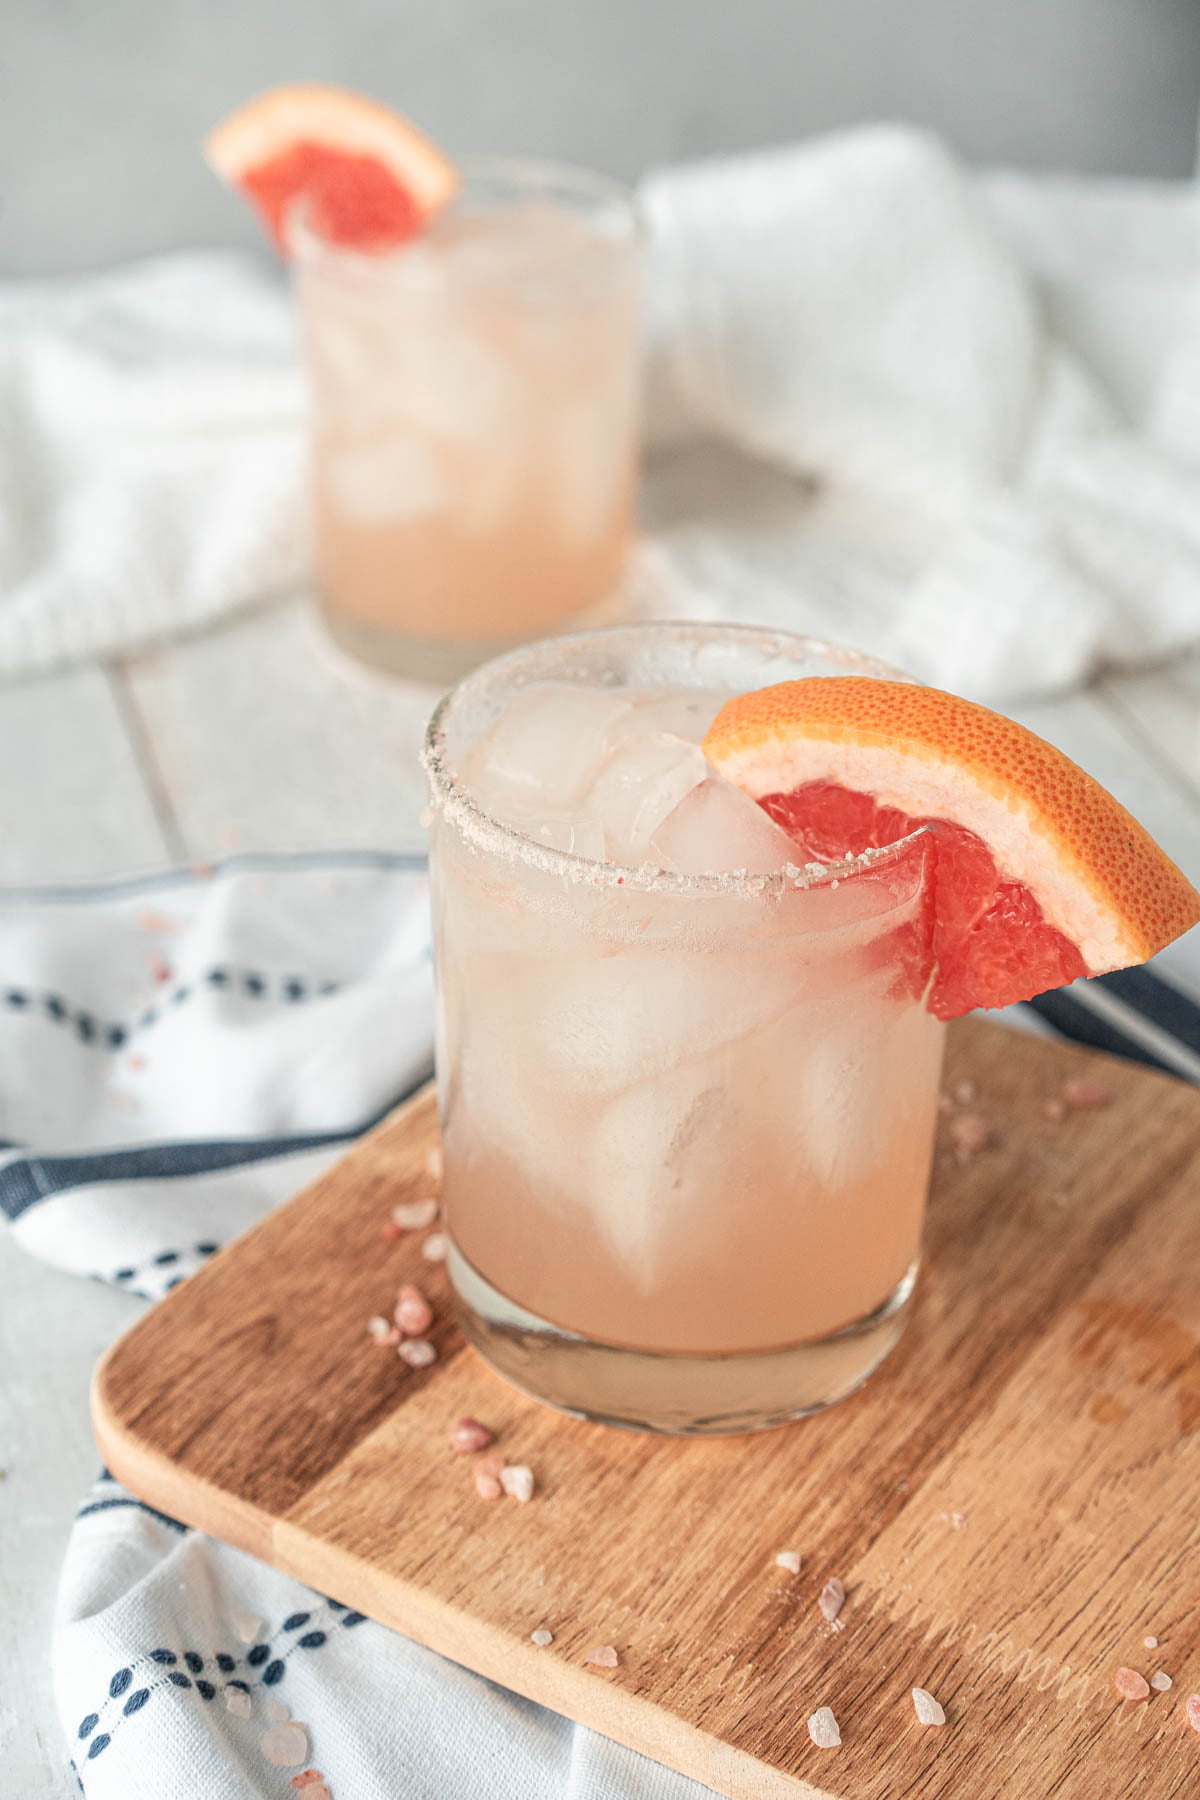 In the foreground, rocks glass sitting on a wood cutting board, glass is filled with light pink drink and garnished with pink salt and a grapefruit wedge. Blurred in the background, a matching glass is sitting against a white and grey backdrop